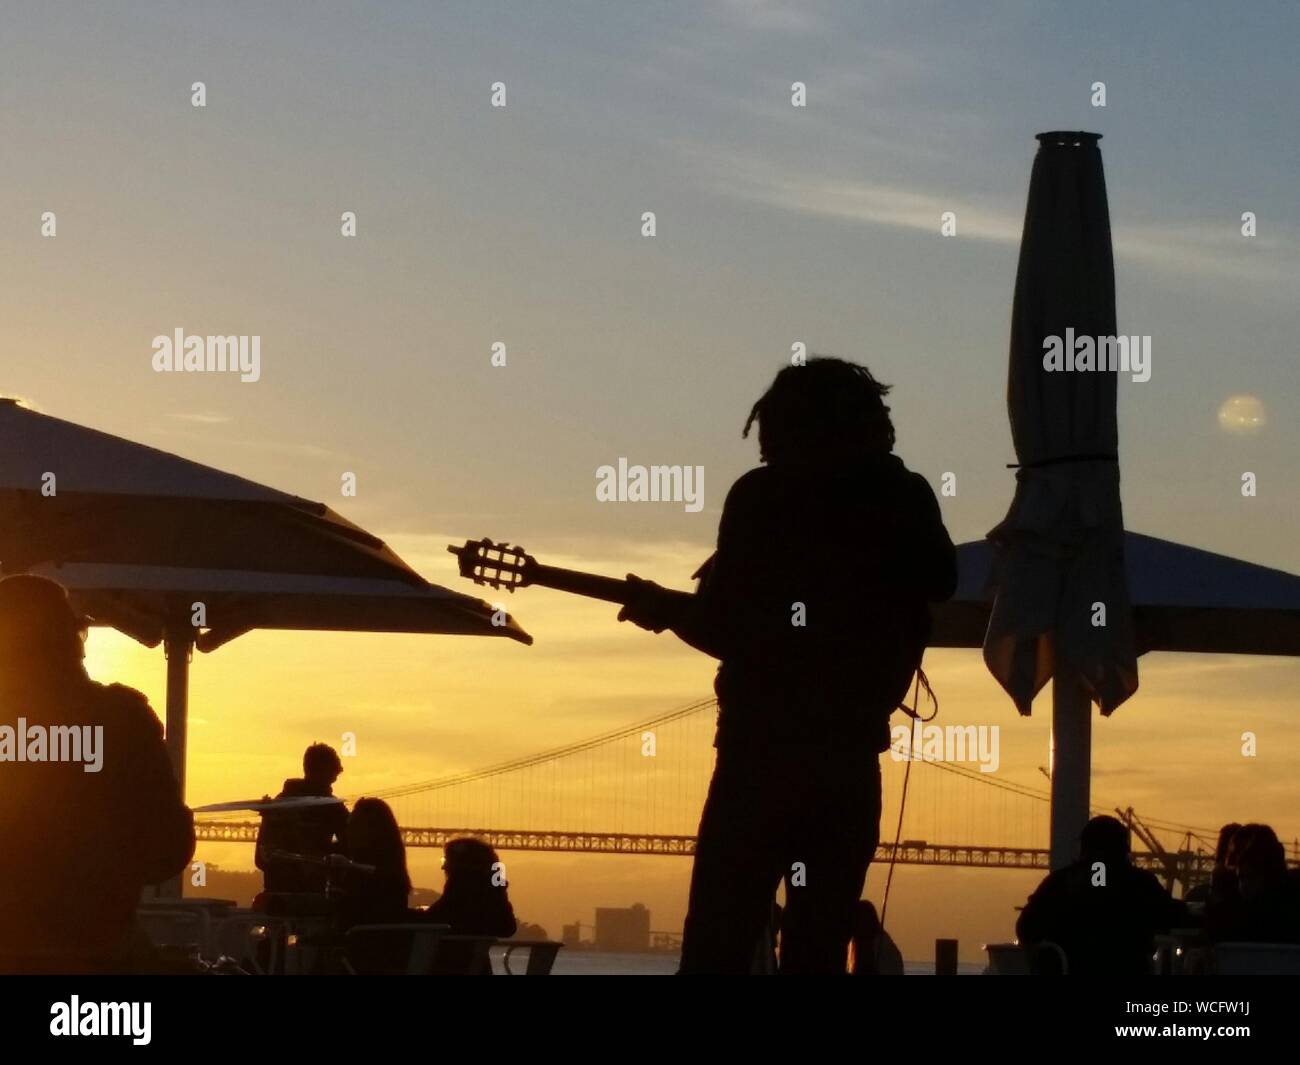 Silhouette Guitarist Playing Guitar At Cafe By Bridge Against Orange Sky Stock Photo